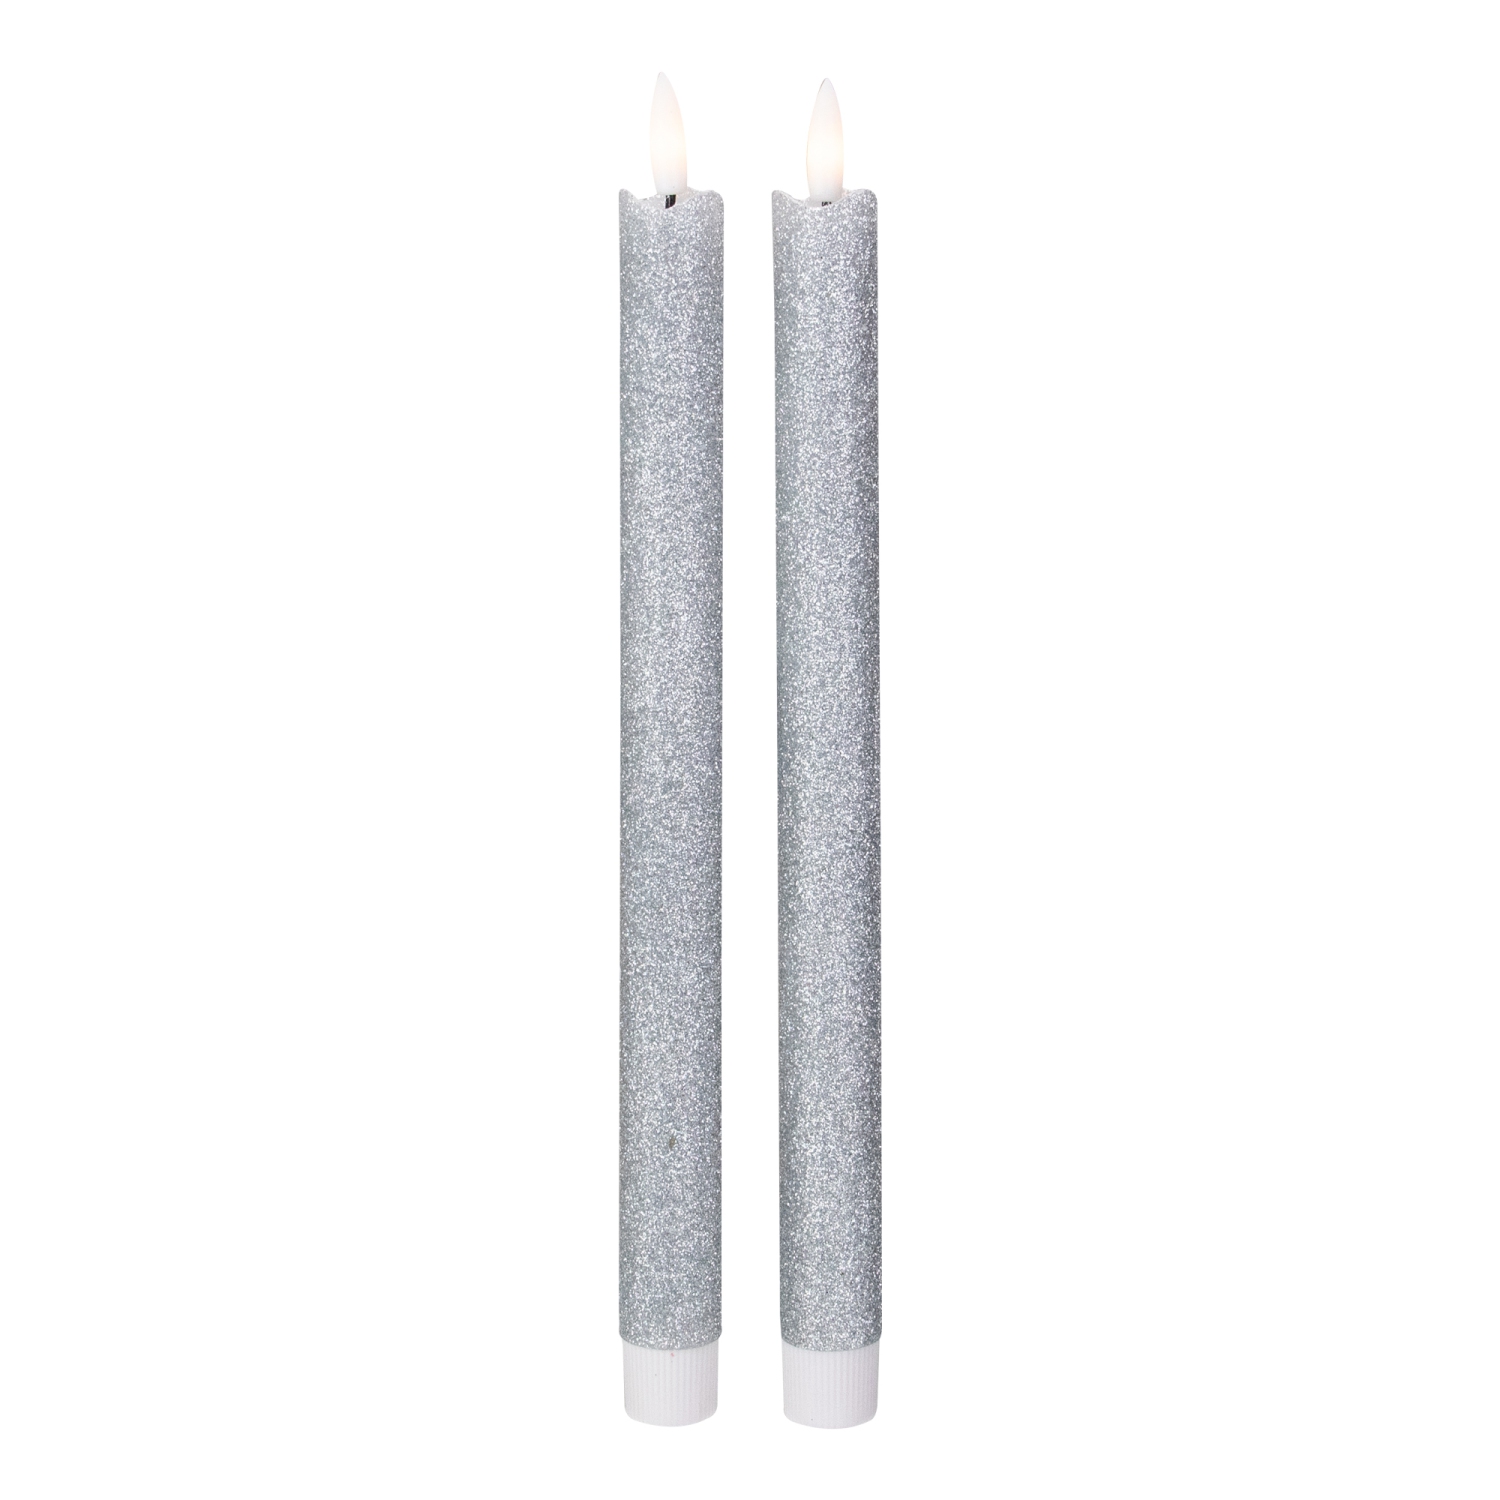 Set 2 Silver Glittered LED Flameless Taper Christmas Candles 11"